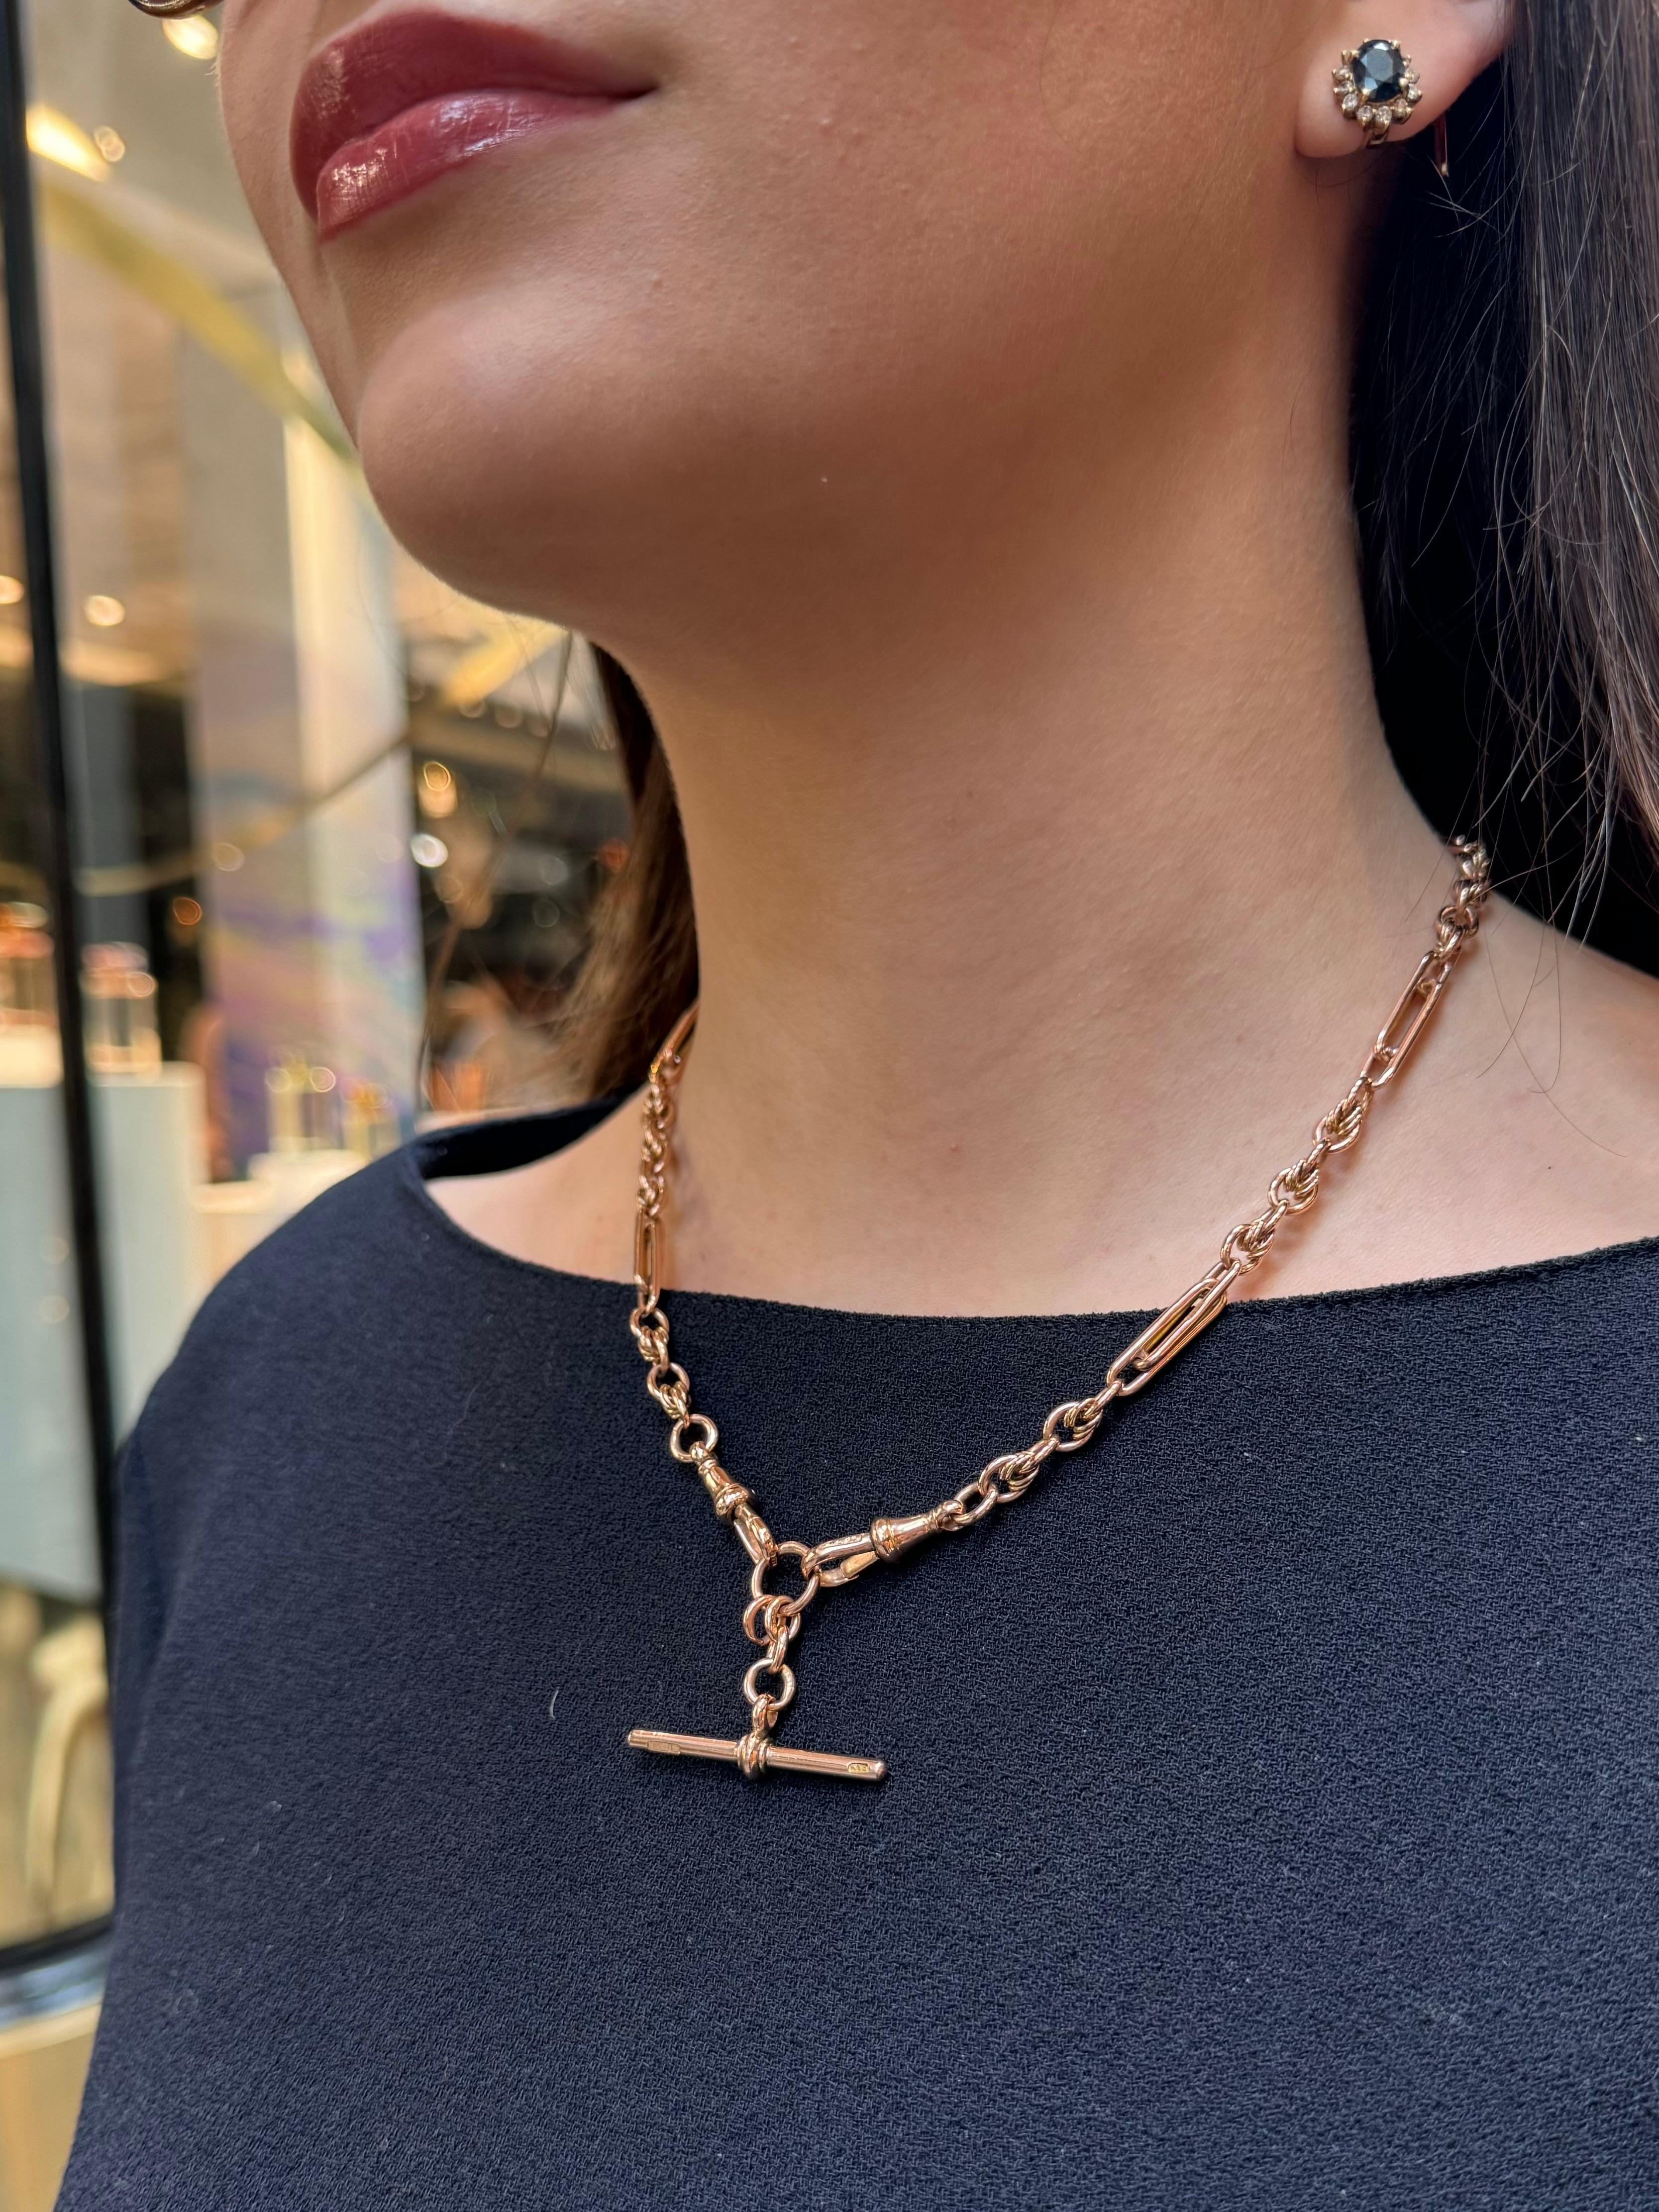 An extremely stylish vintage Albert chain necklace set in 9k rose gold.

The Albert chain is an iconic statement piece of jewellery, popularised by Prince Albert in the mid 1800’s. The chain traditionally was attached to a gentleman’s pocket watch,